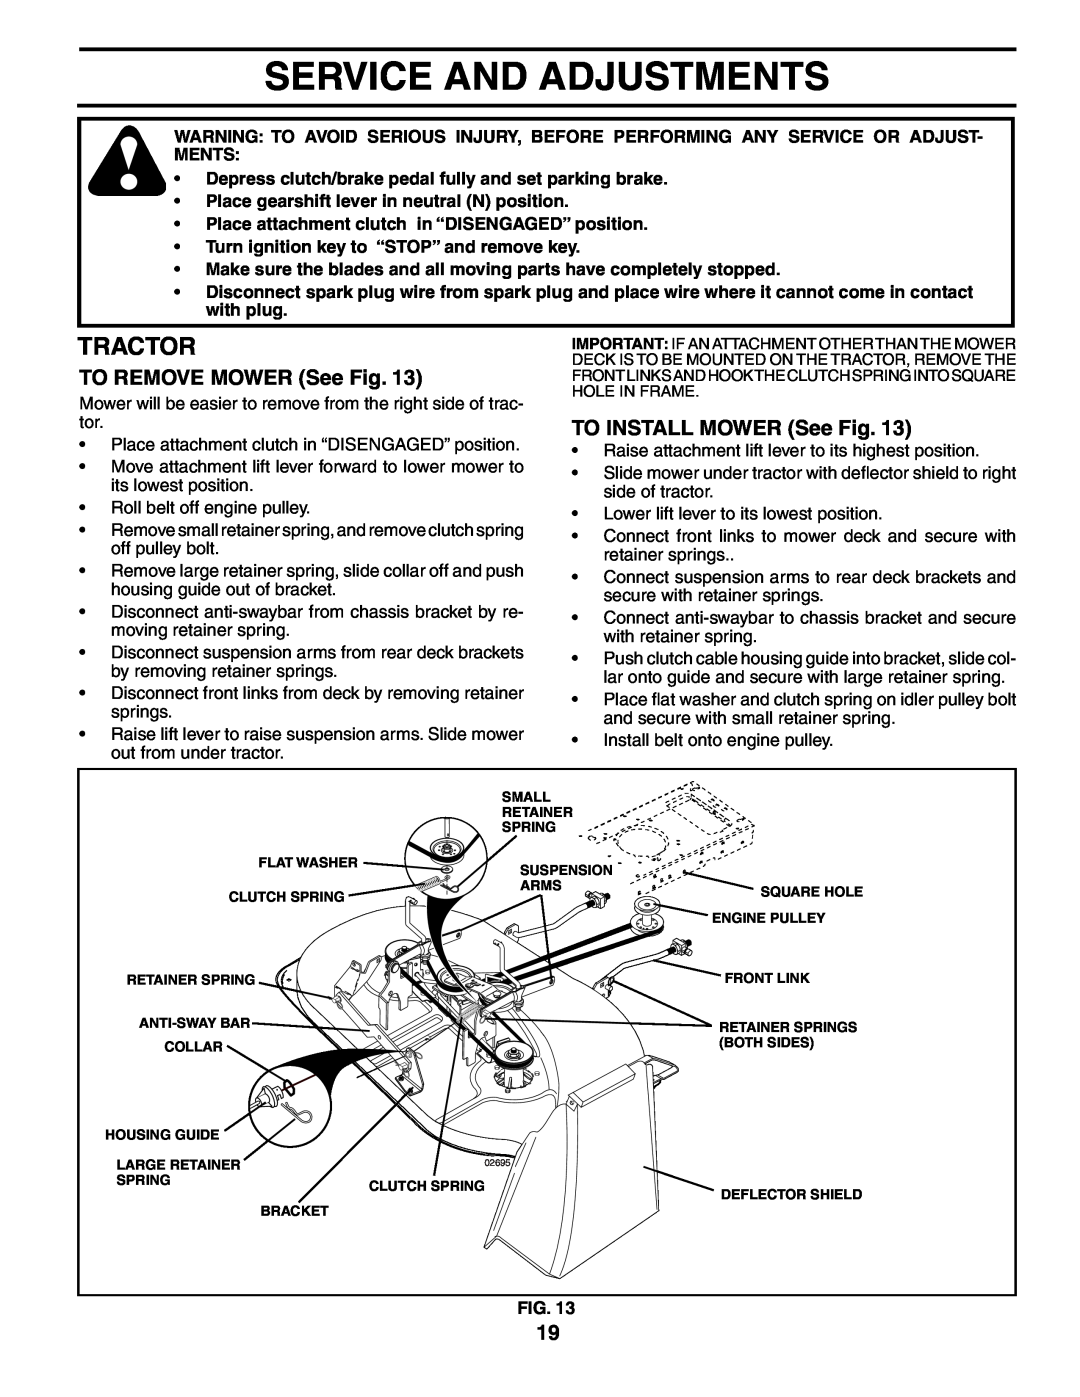 Poulan HD13538 manual Service And Adjustments, TO REMOVE MOWER See Fig, TO INSTALL MOWER See Fig, Tractor 